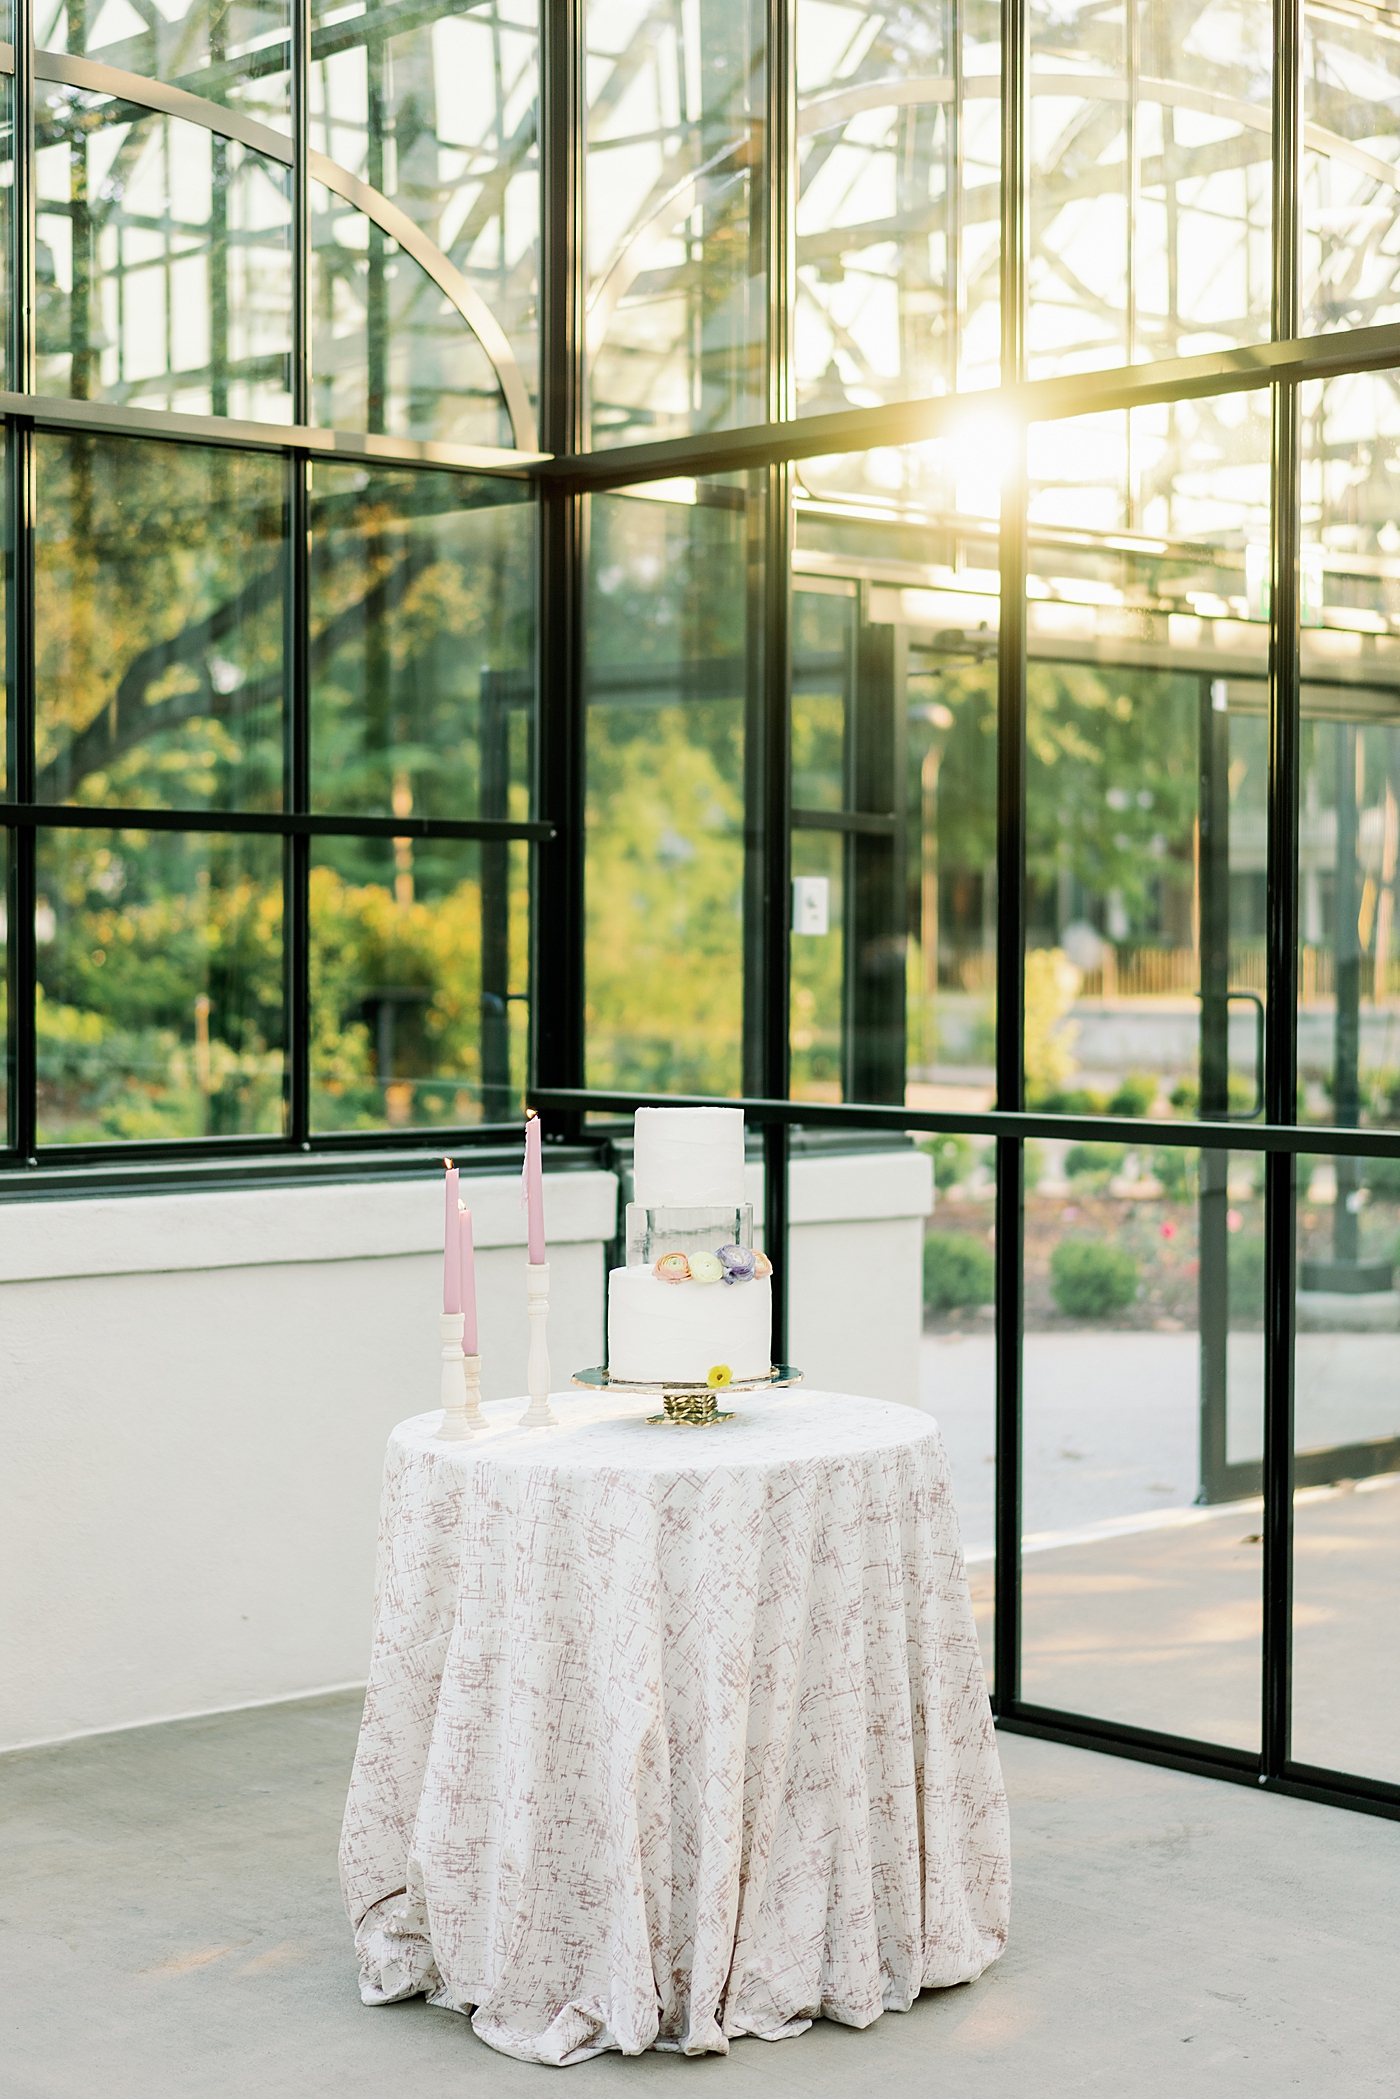 Cake table with cake and pink pillar candles in a greenhouse | Photo by Annie Laura Photo